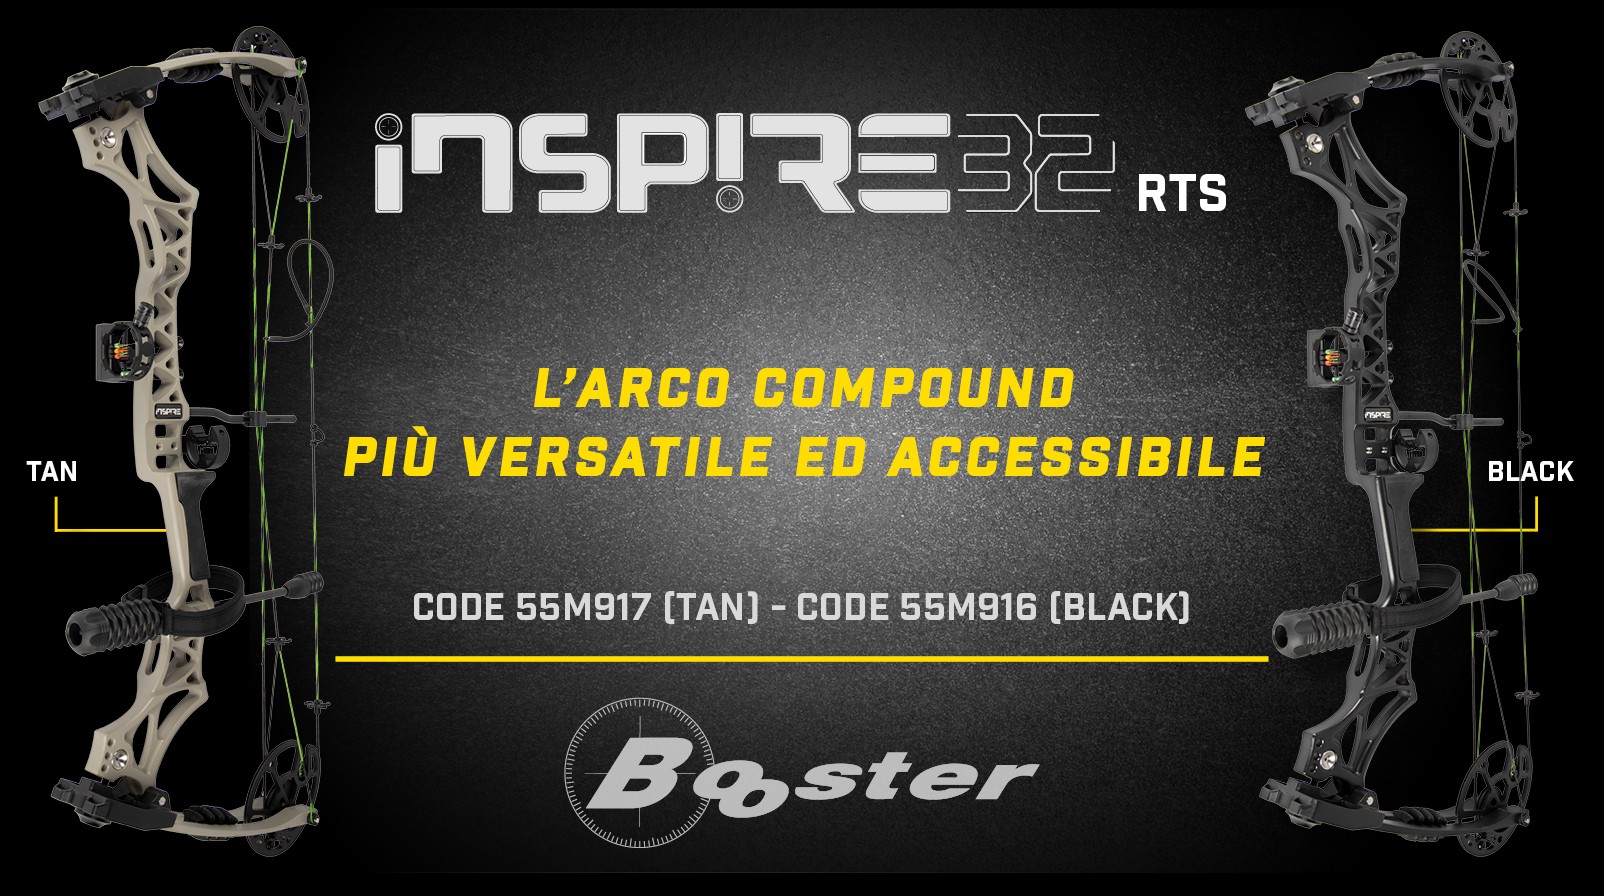 BOOSTER INSPIRE 32 RTS